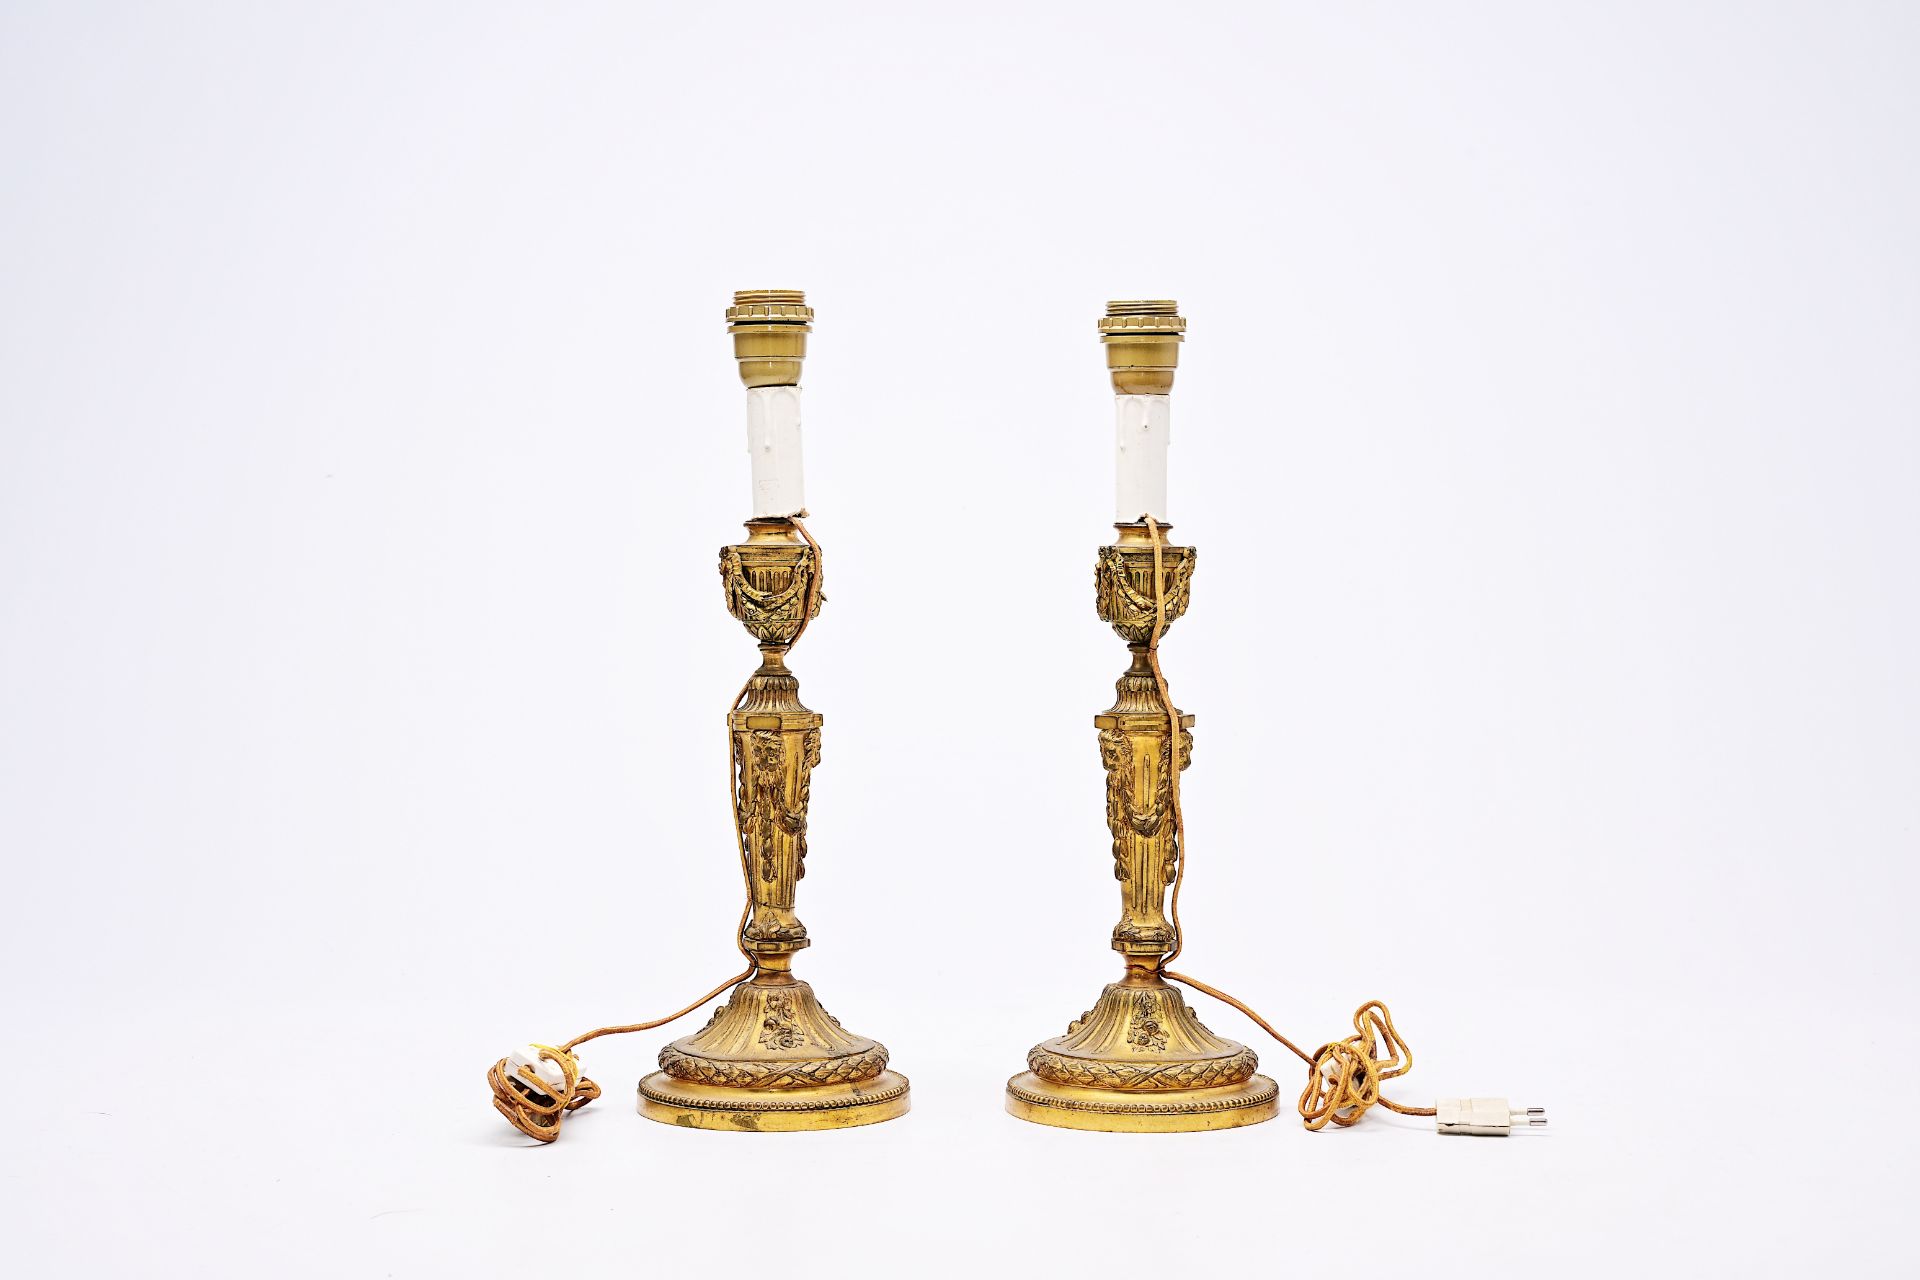 A pair of French Neoclassical gilt bronze candlesticks with lion heads and garlands mounted as lamps